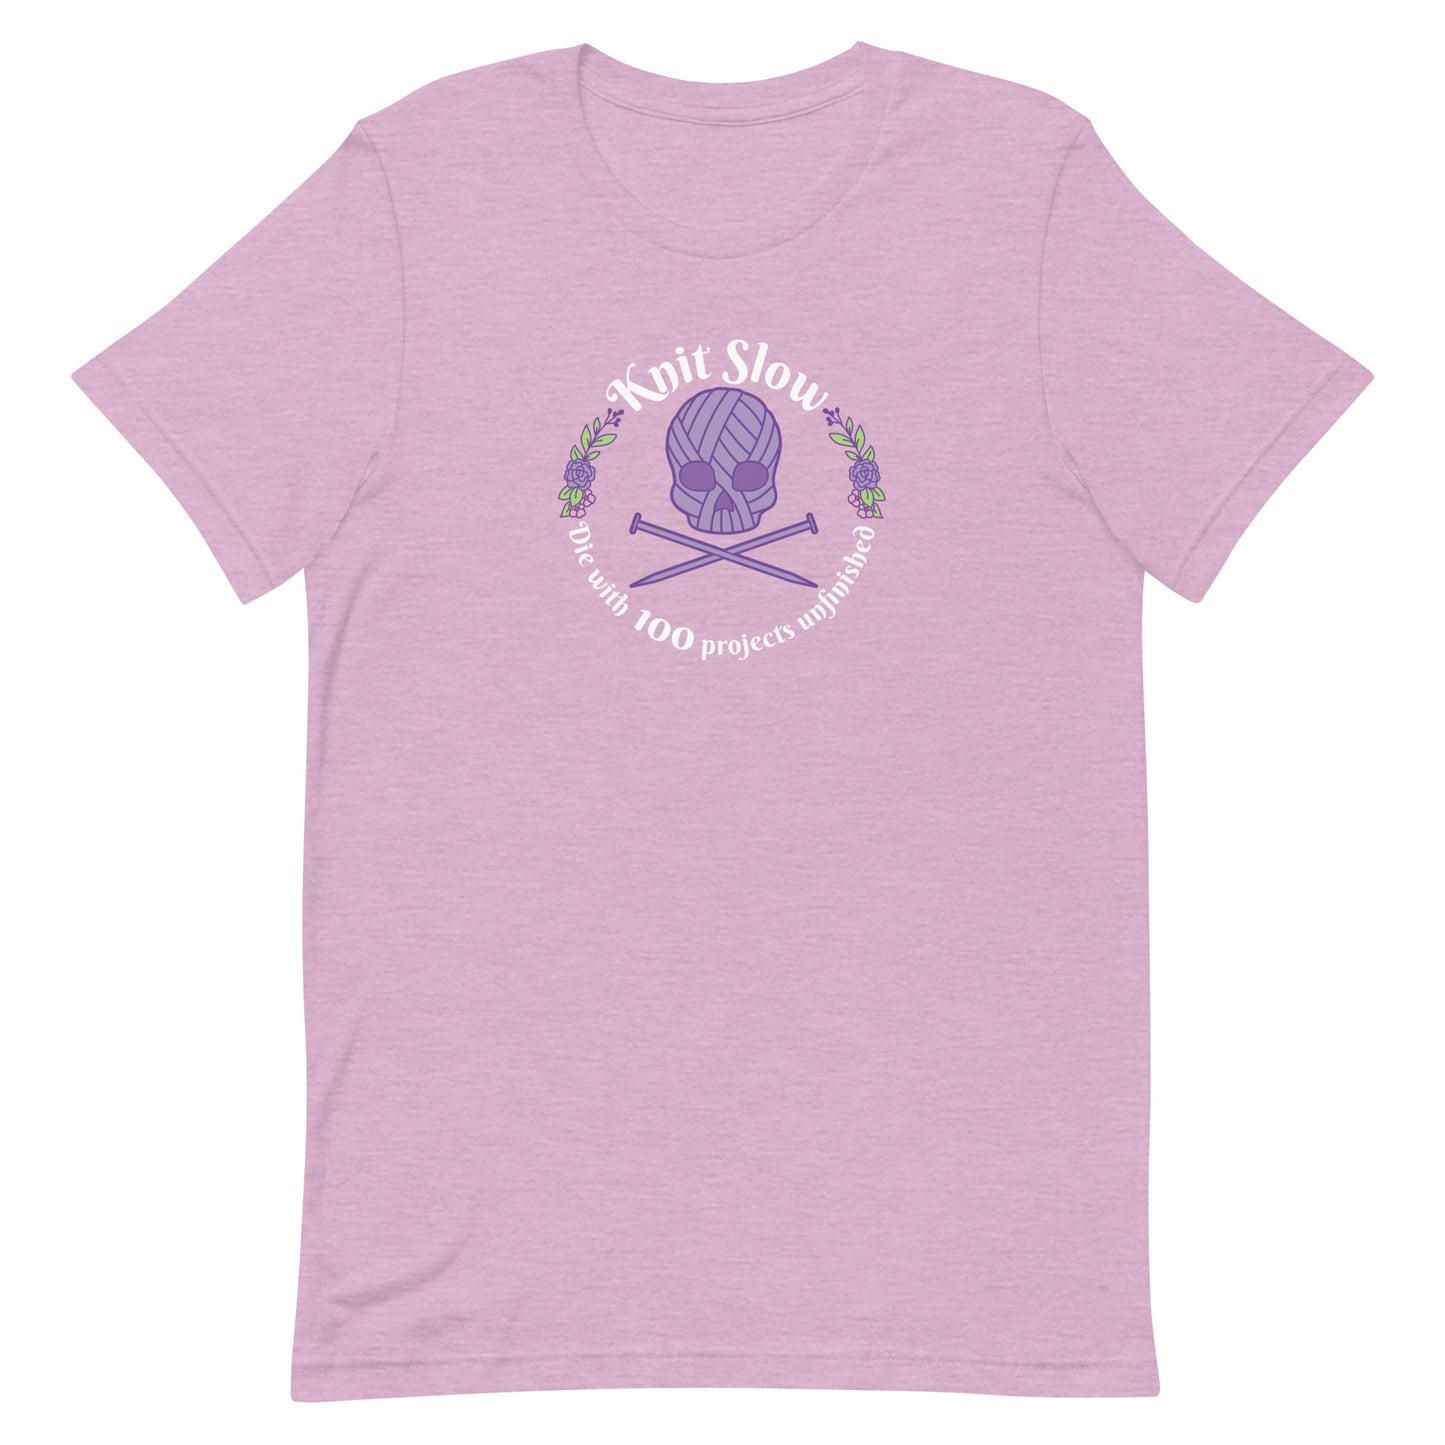 A heathered pink crewneck t-shirt featuring an image of a skull and crossbones made of yarn and knitting needles. A floral wreath surrounds the skull, along with words that read "Knit Slow, Die with 100 projects unfinished"